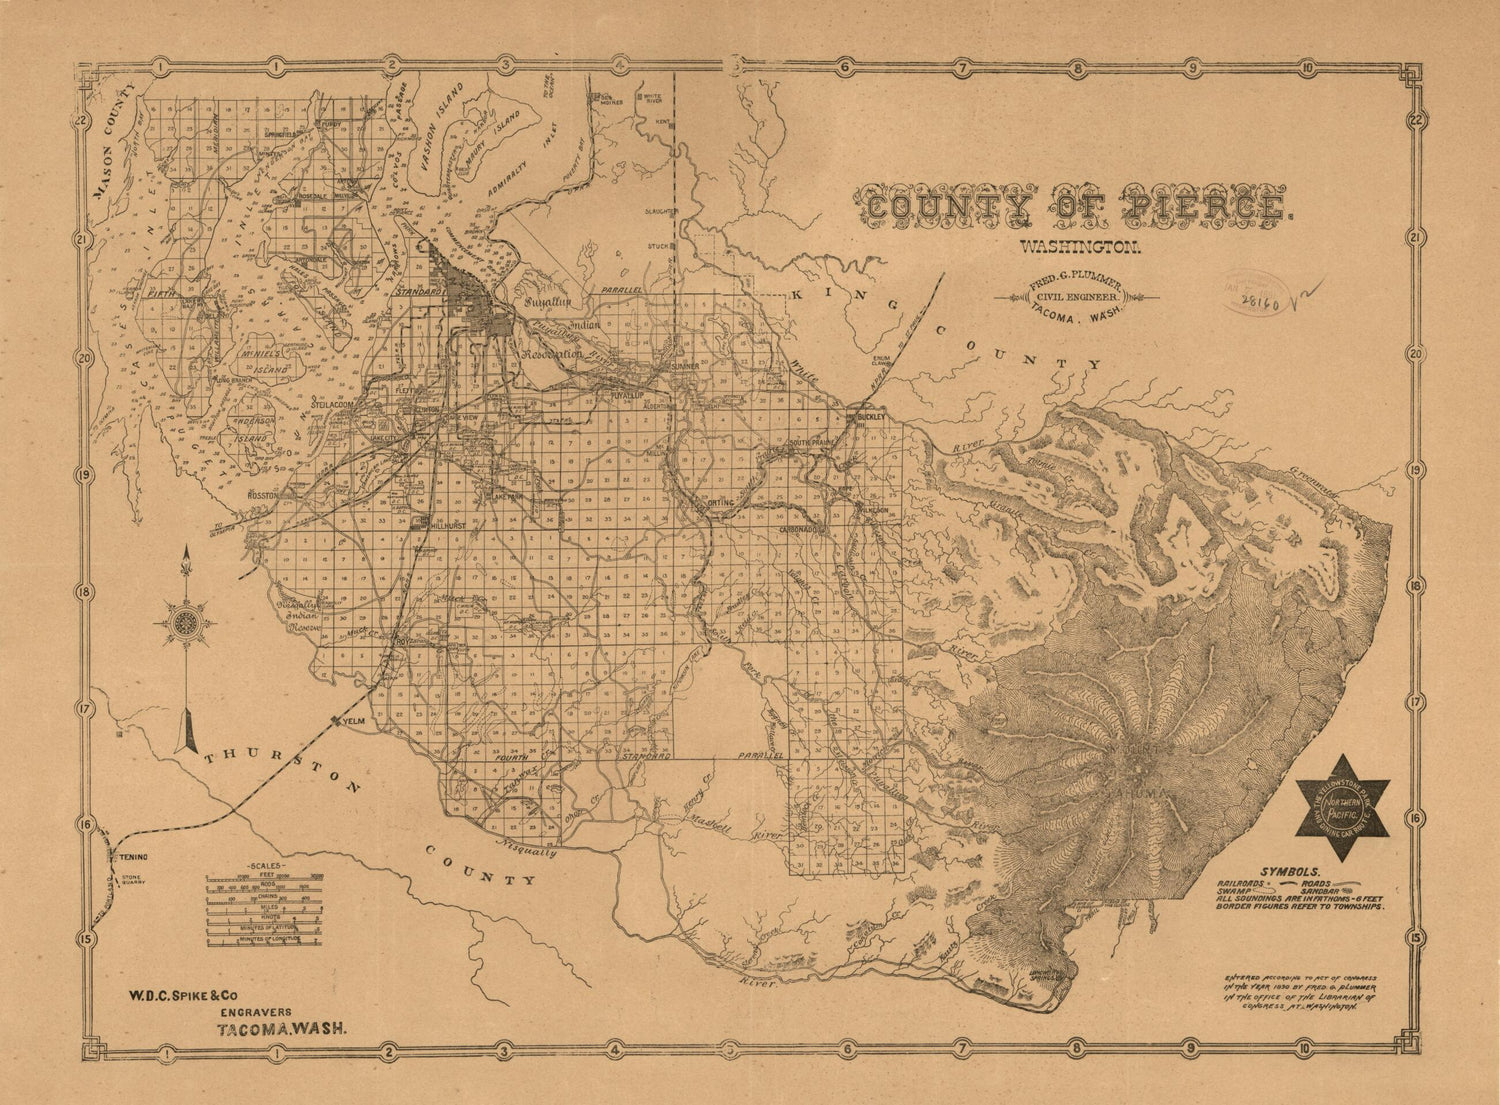 This old map of County of Pierce, Washington from 1890 was created by Fred G. (Fred Gordon) Plummer in 1890